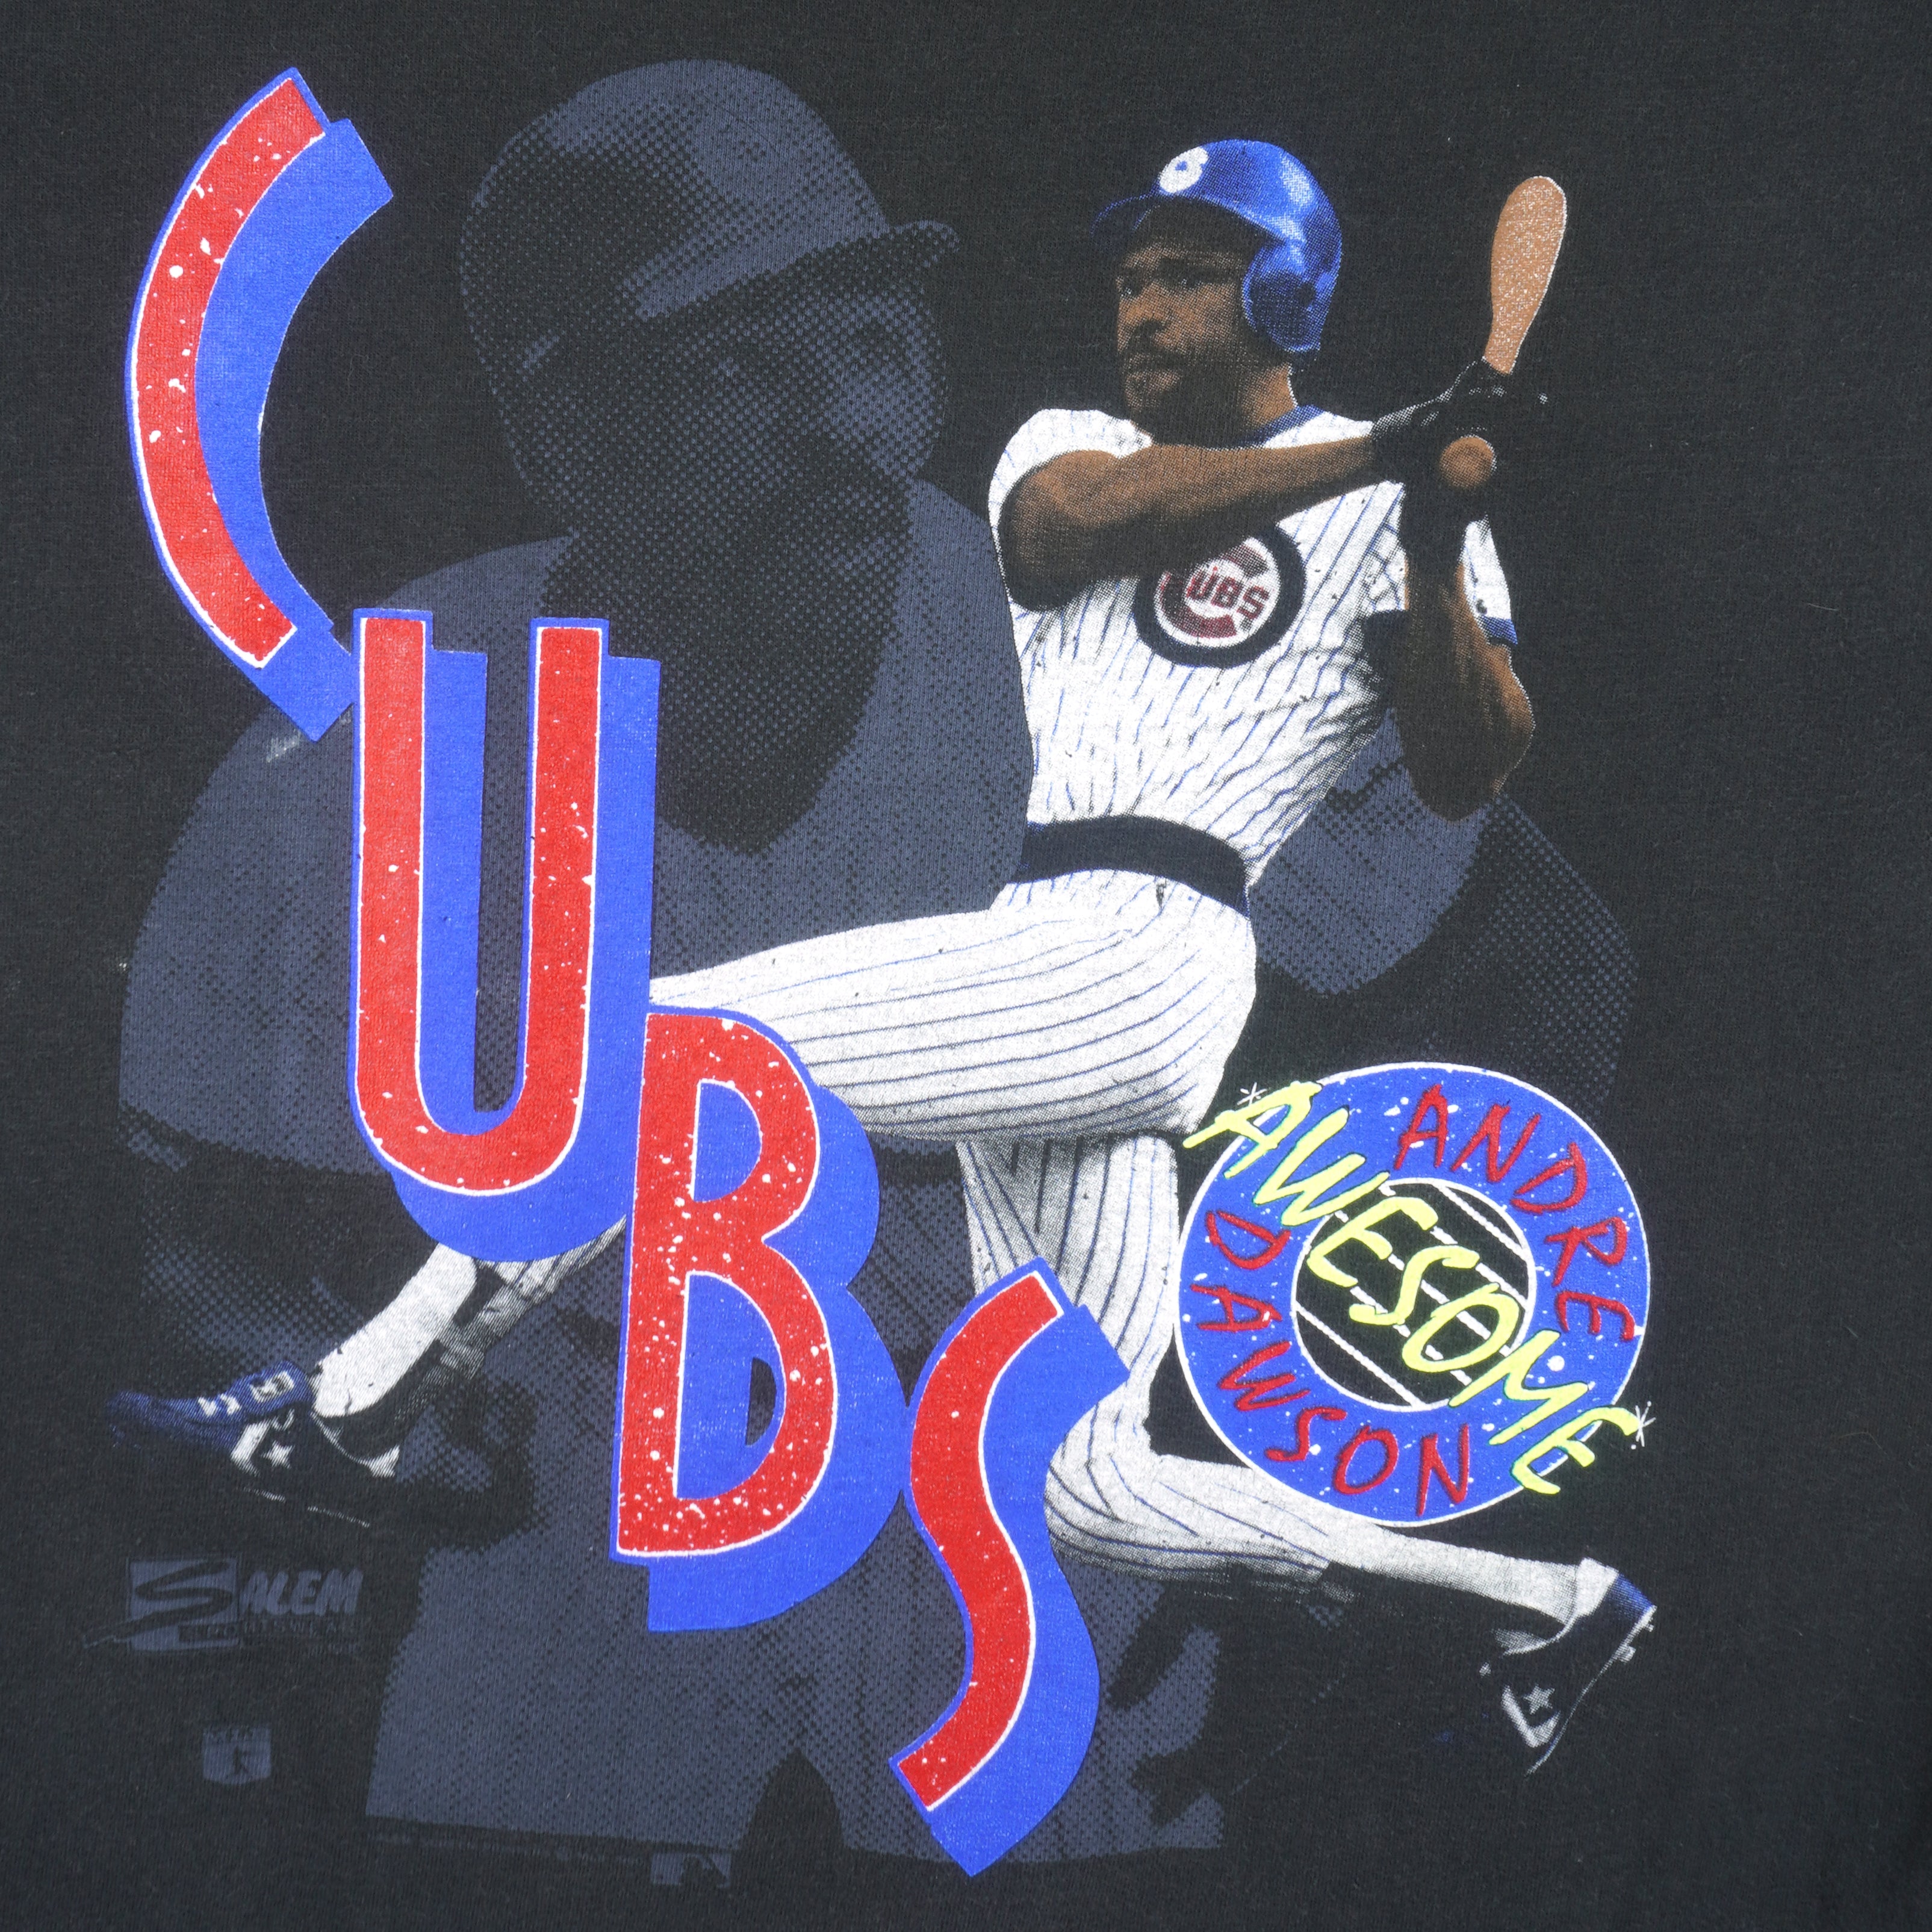 90s Chicago Cubs 1990 All Star Game Baseball t-shirt Large - The